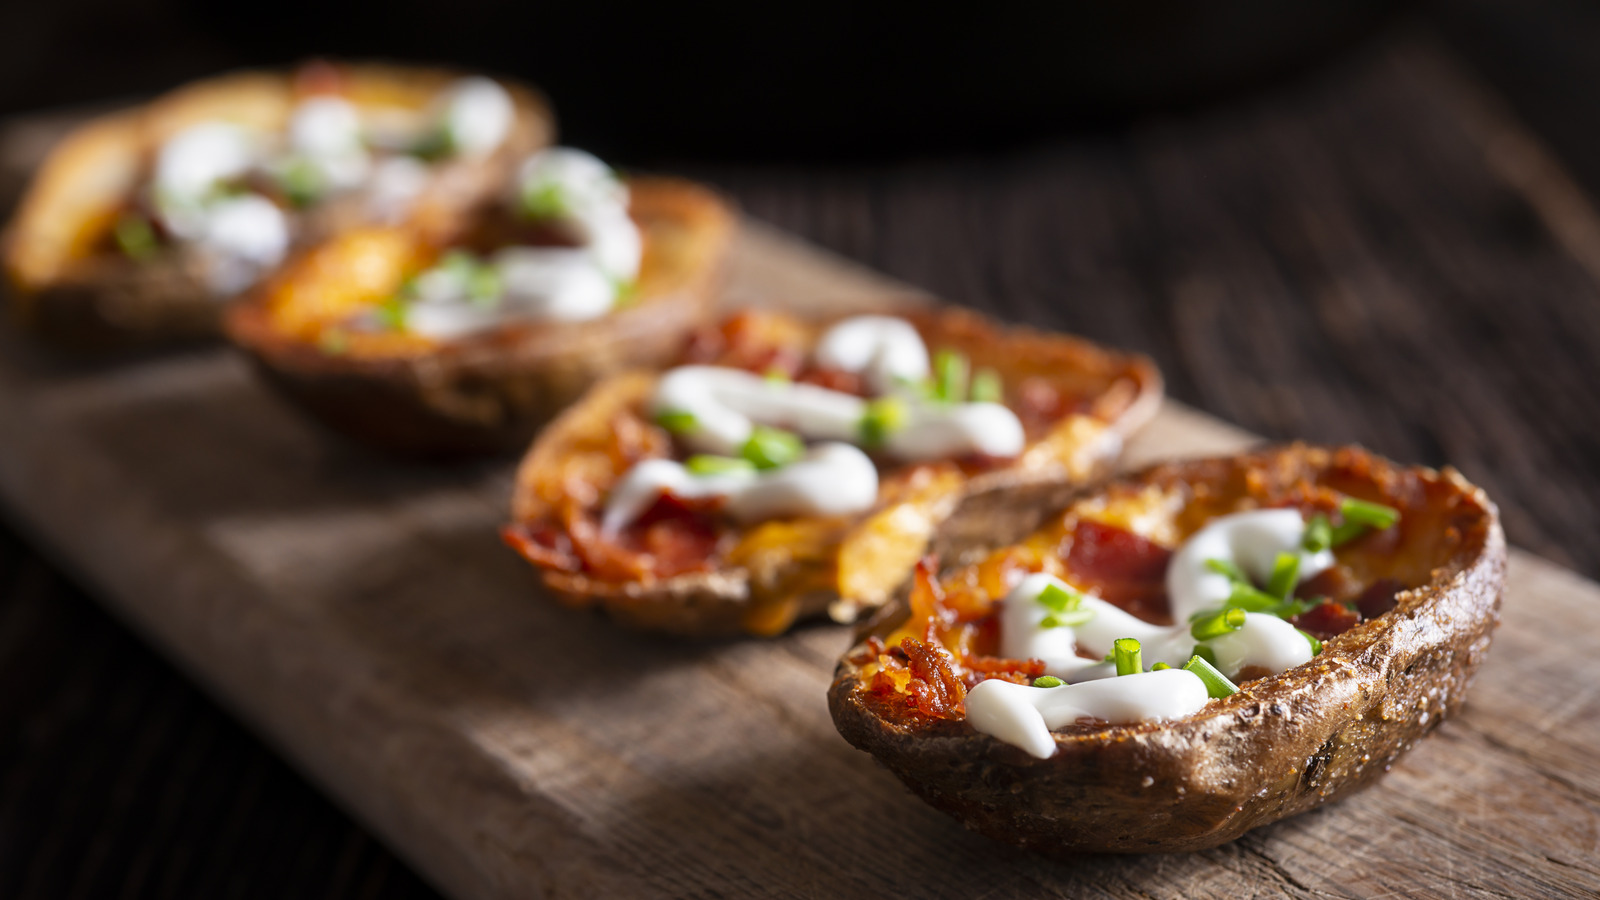 Want To Upgrade Your Potato Skins? Break Out The Beer